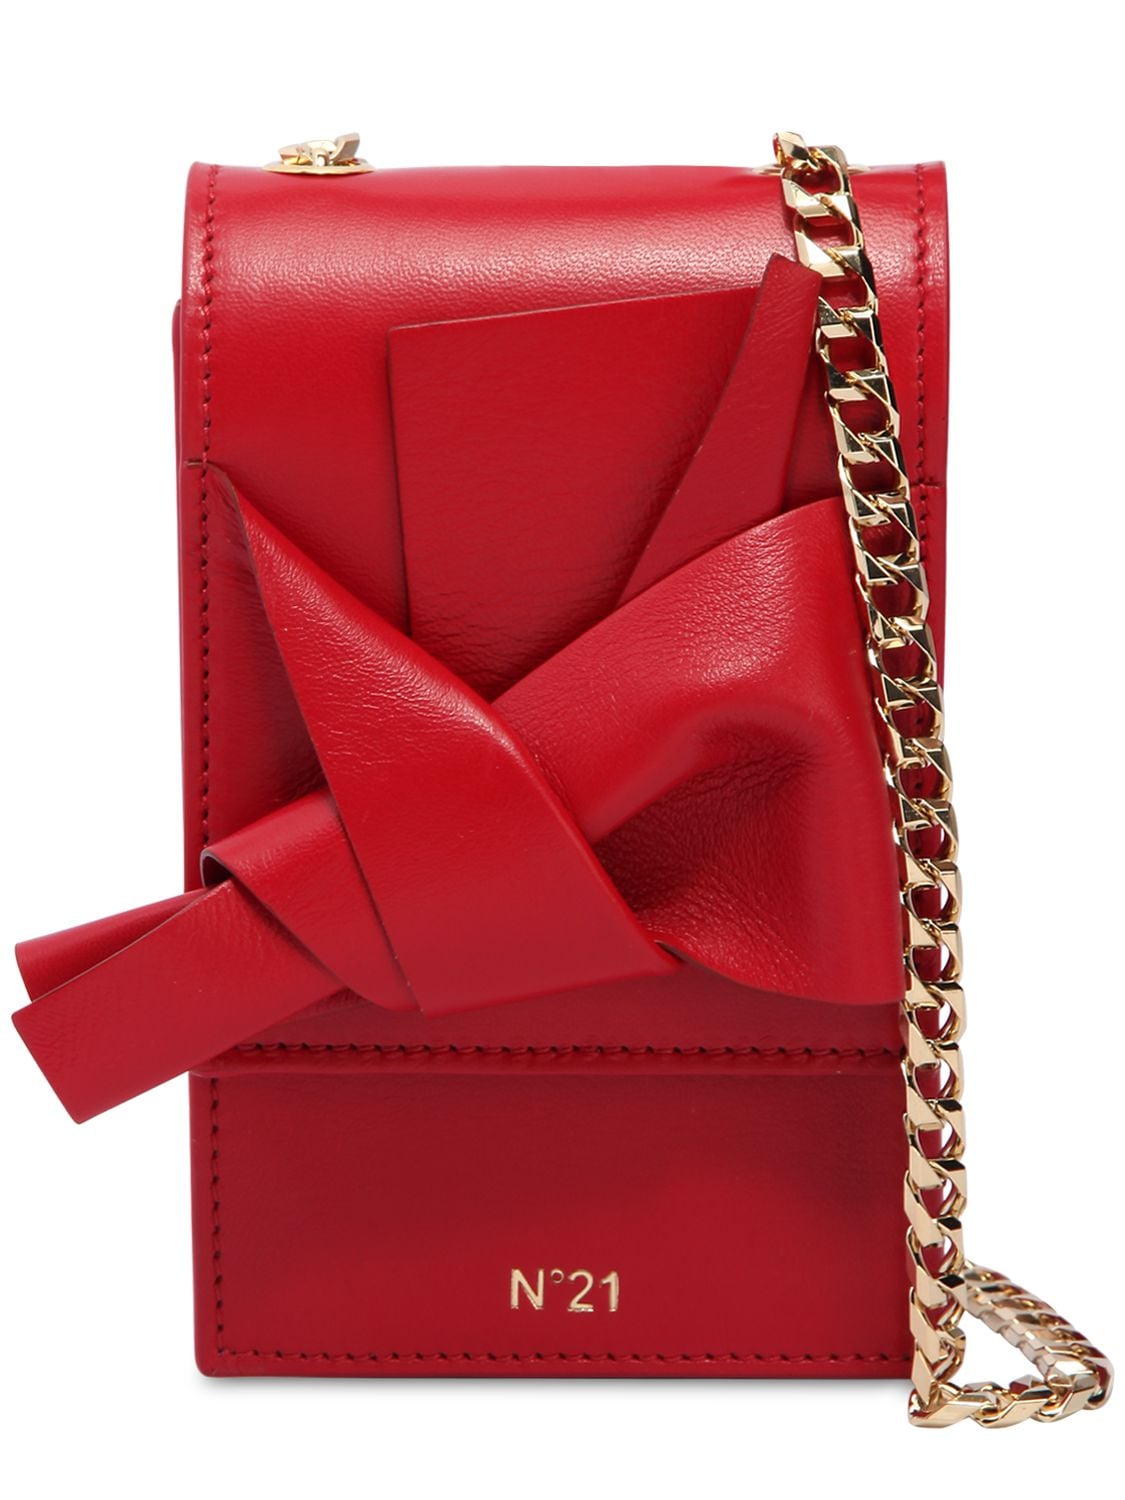 N°21 Micro Bow Nappa Leather Shoulder Bag In Red